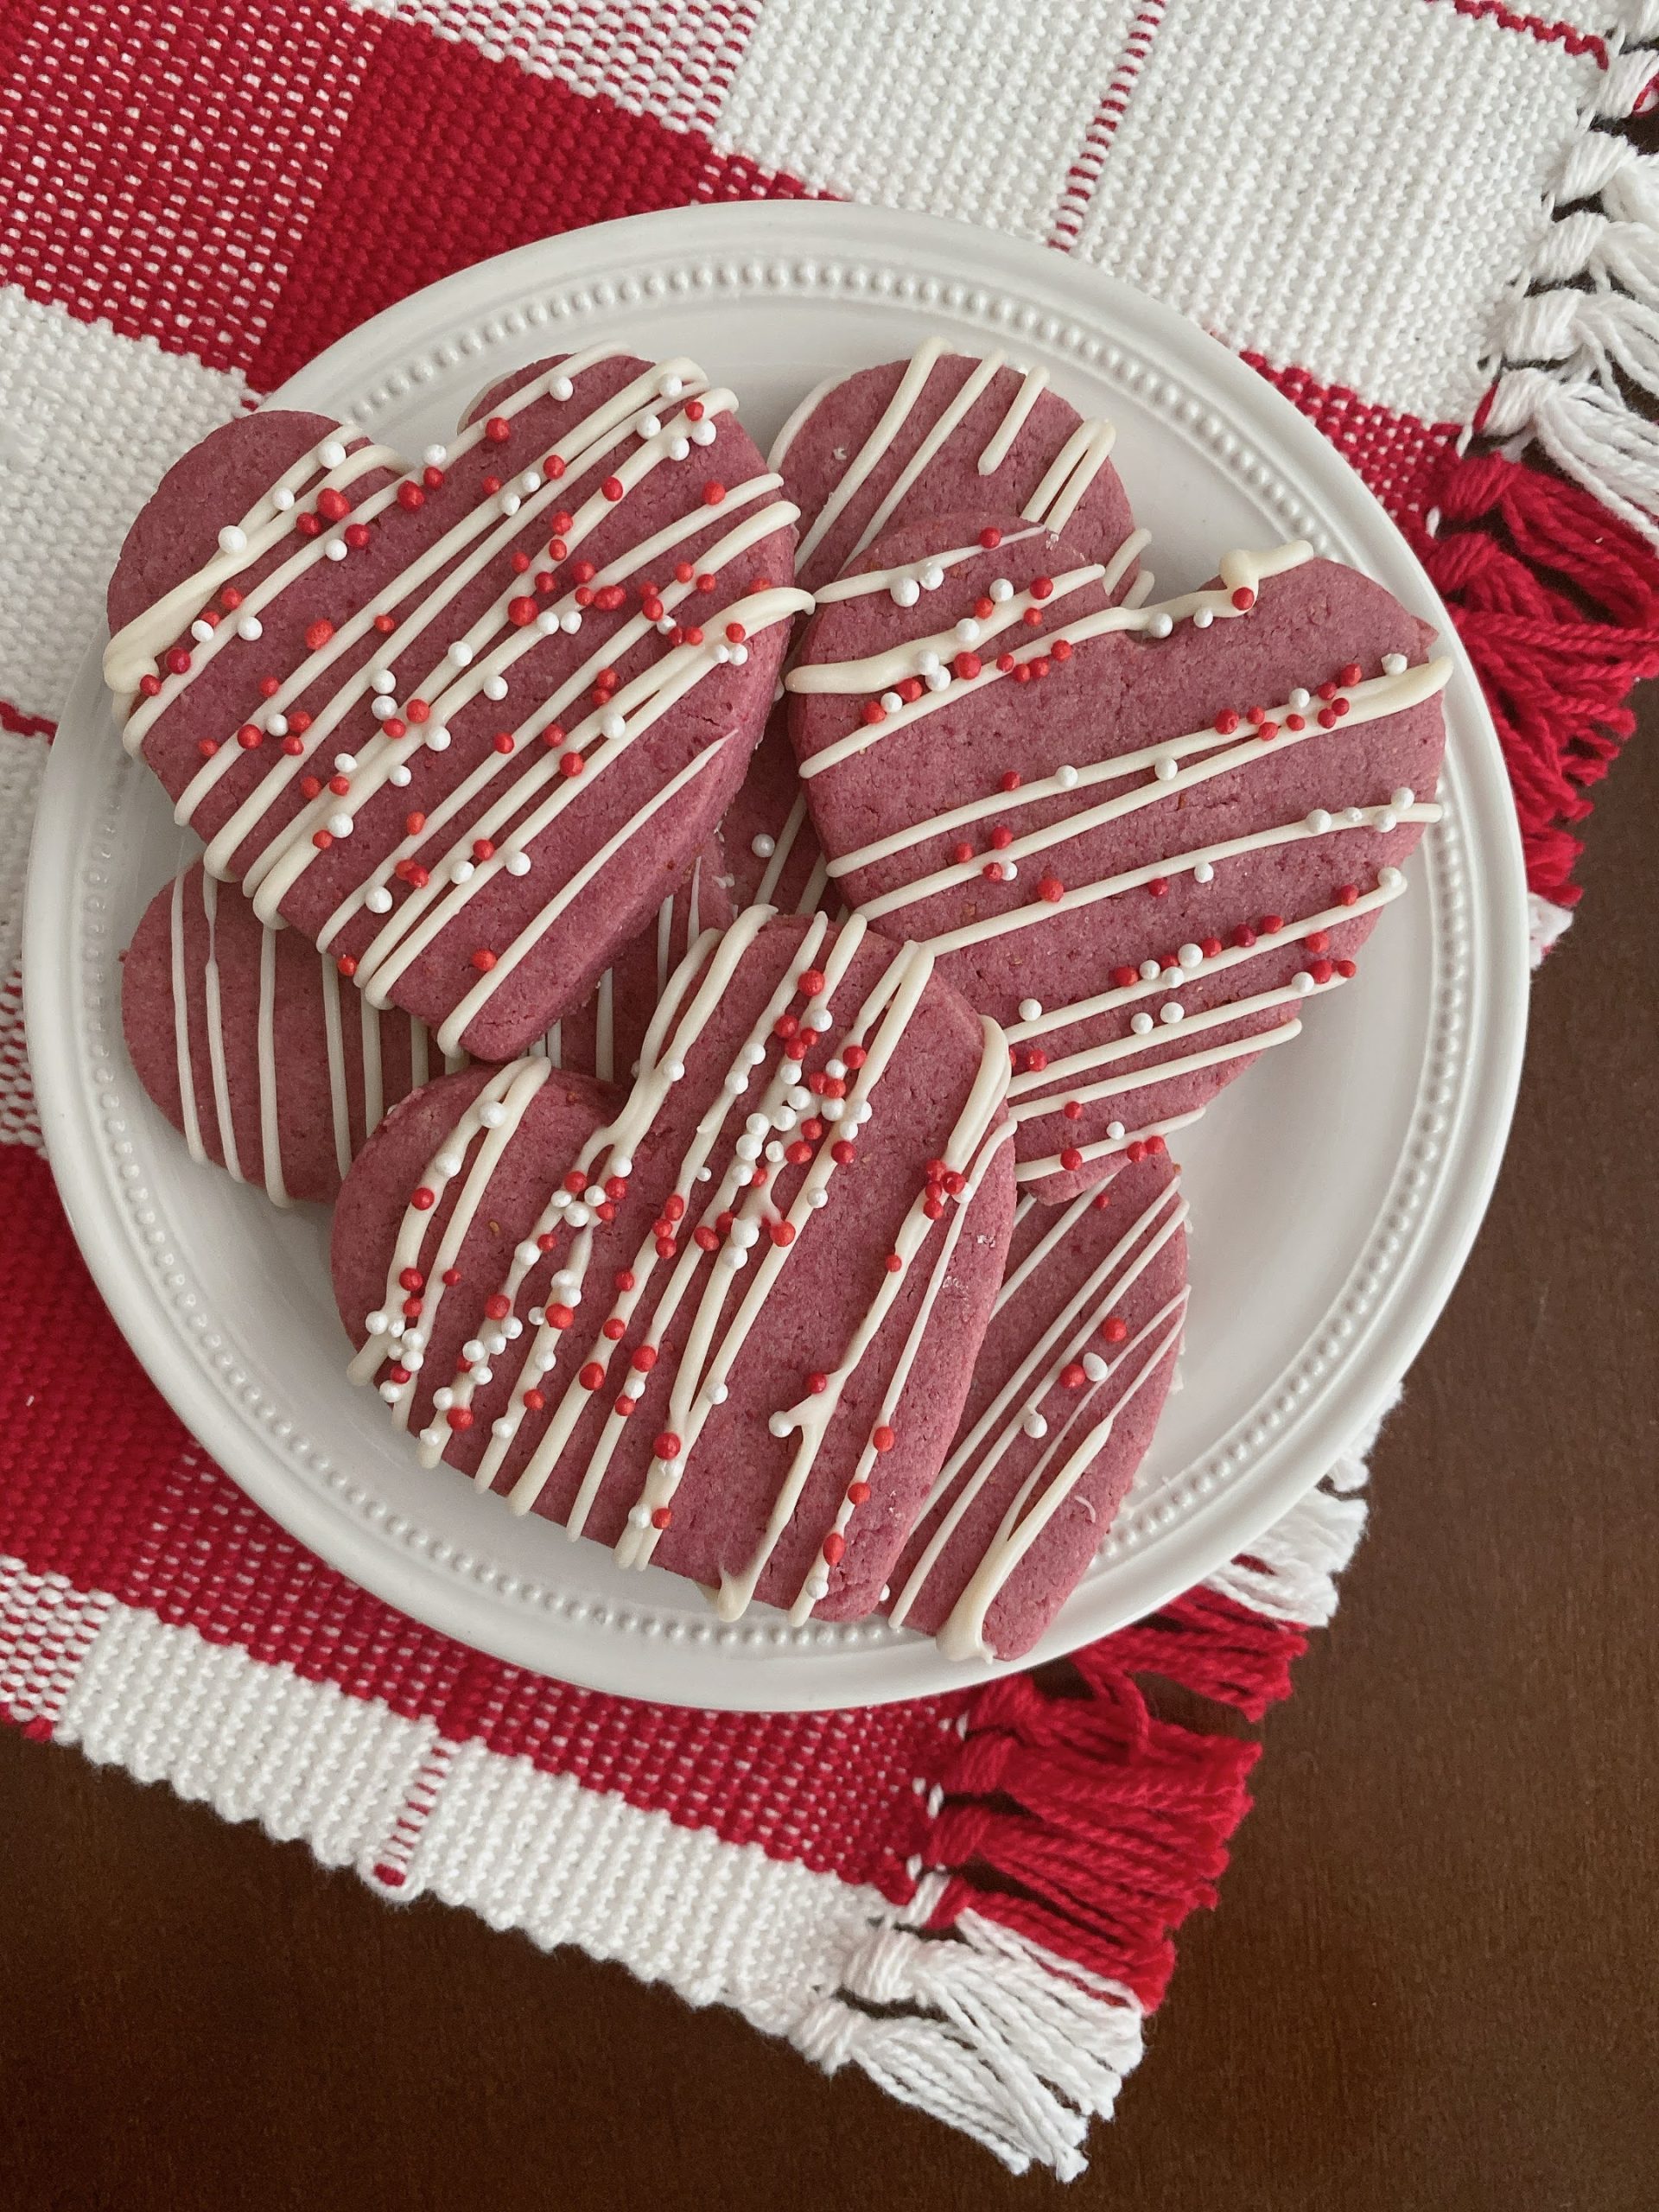 Raspberry sugar cookies made with freeze dried raspberry powder, and NO FOOD DYES! A flavorful sugar cookie perfect for Valentine's Day. Step by step instructions to bake the perfect cookies for your loved ones.